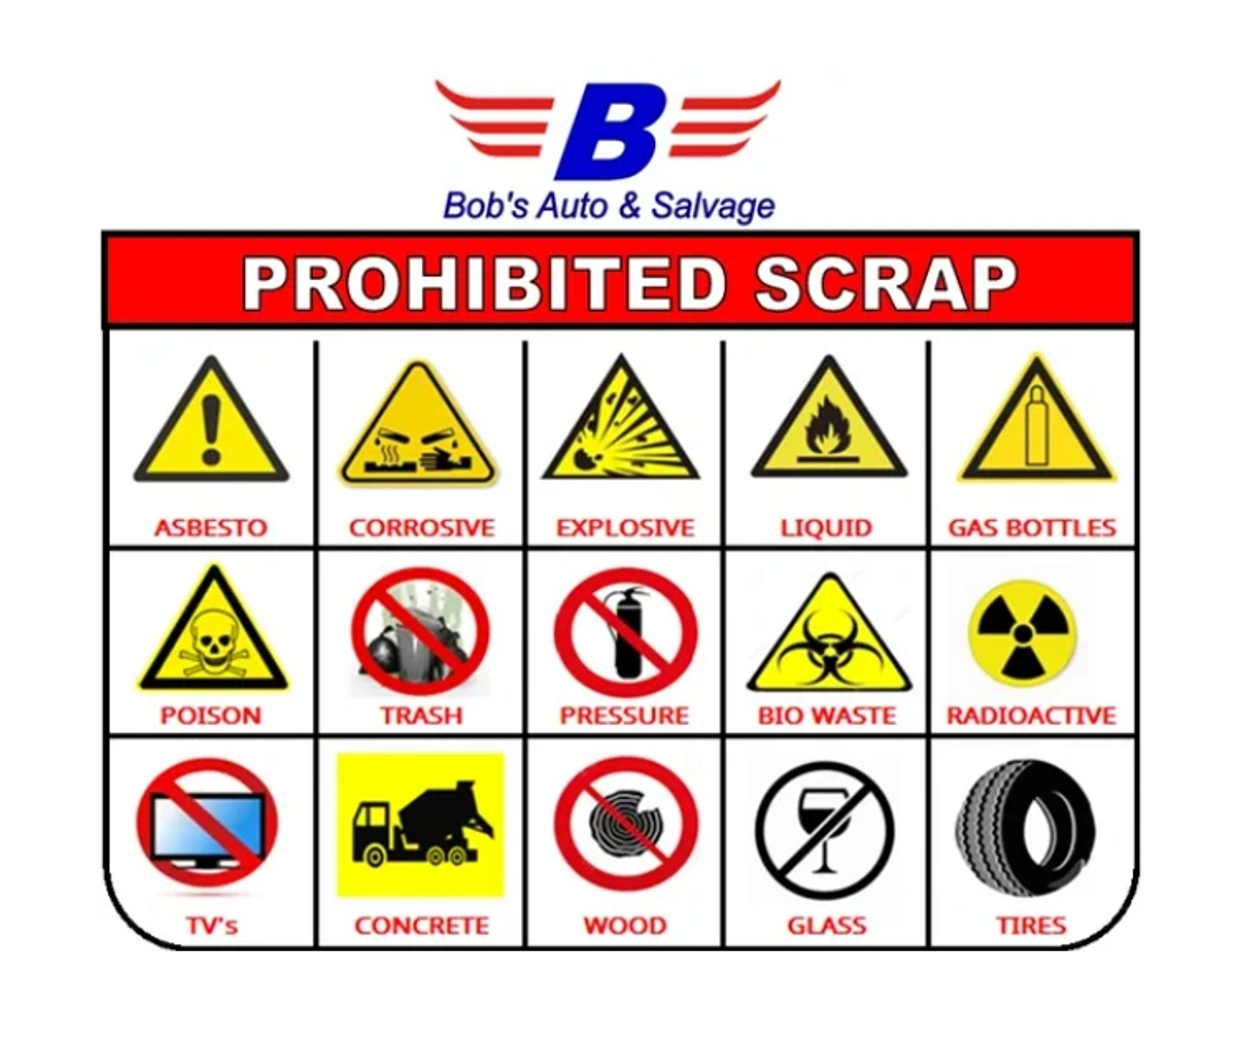 Prohibited Scrap, Bob's Auto & Salvage, List of items we do not accept